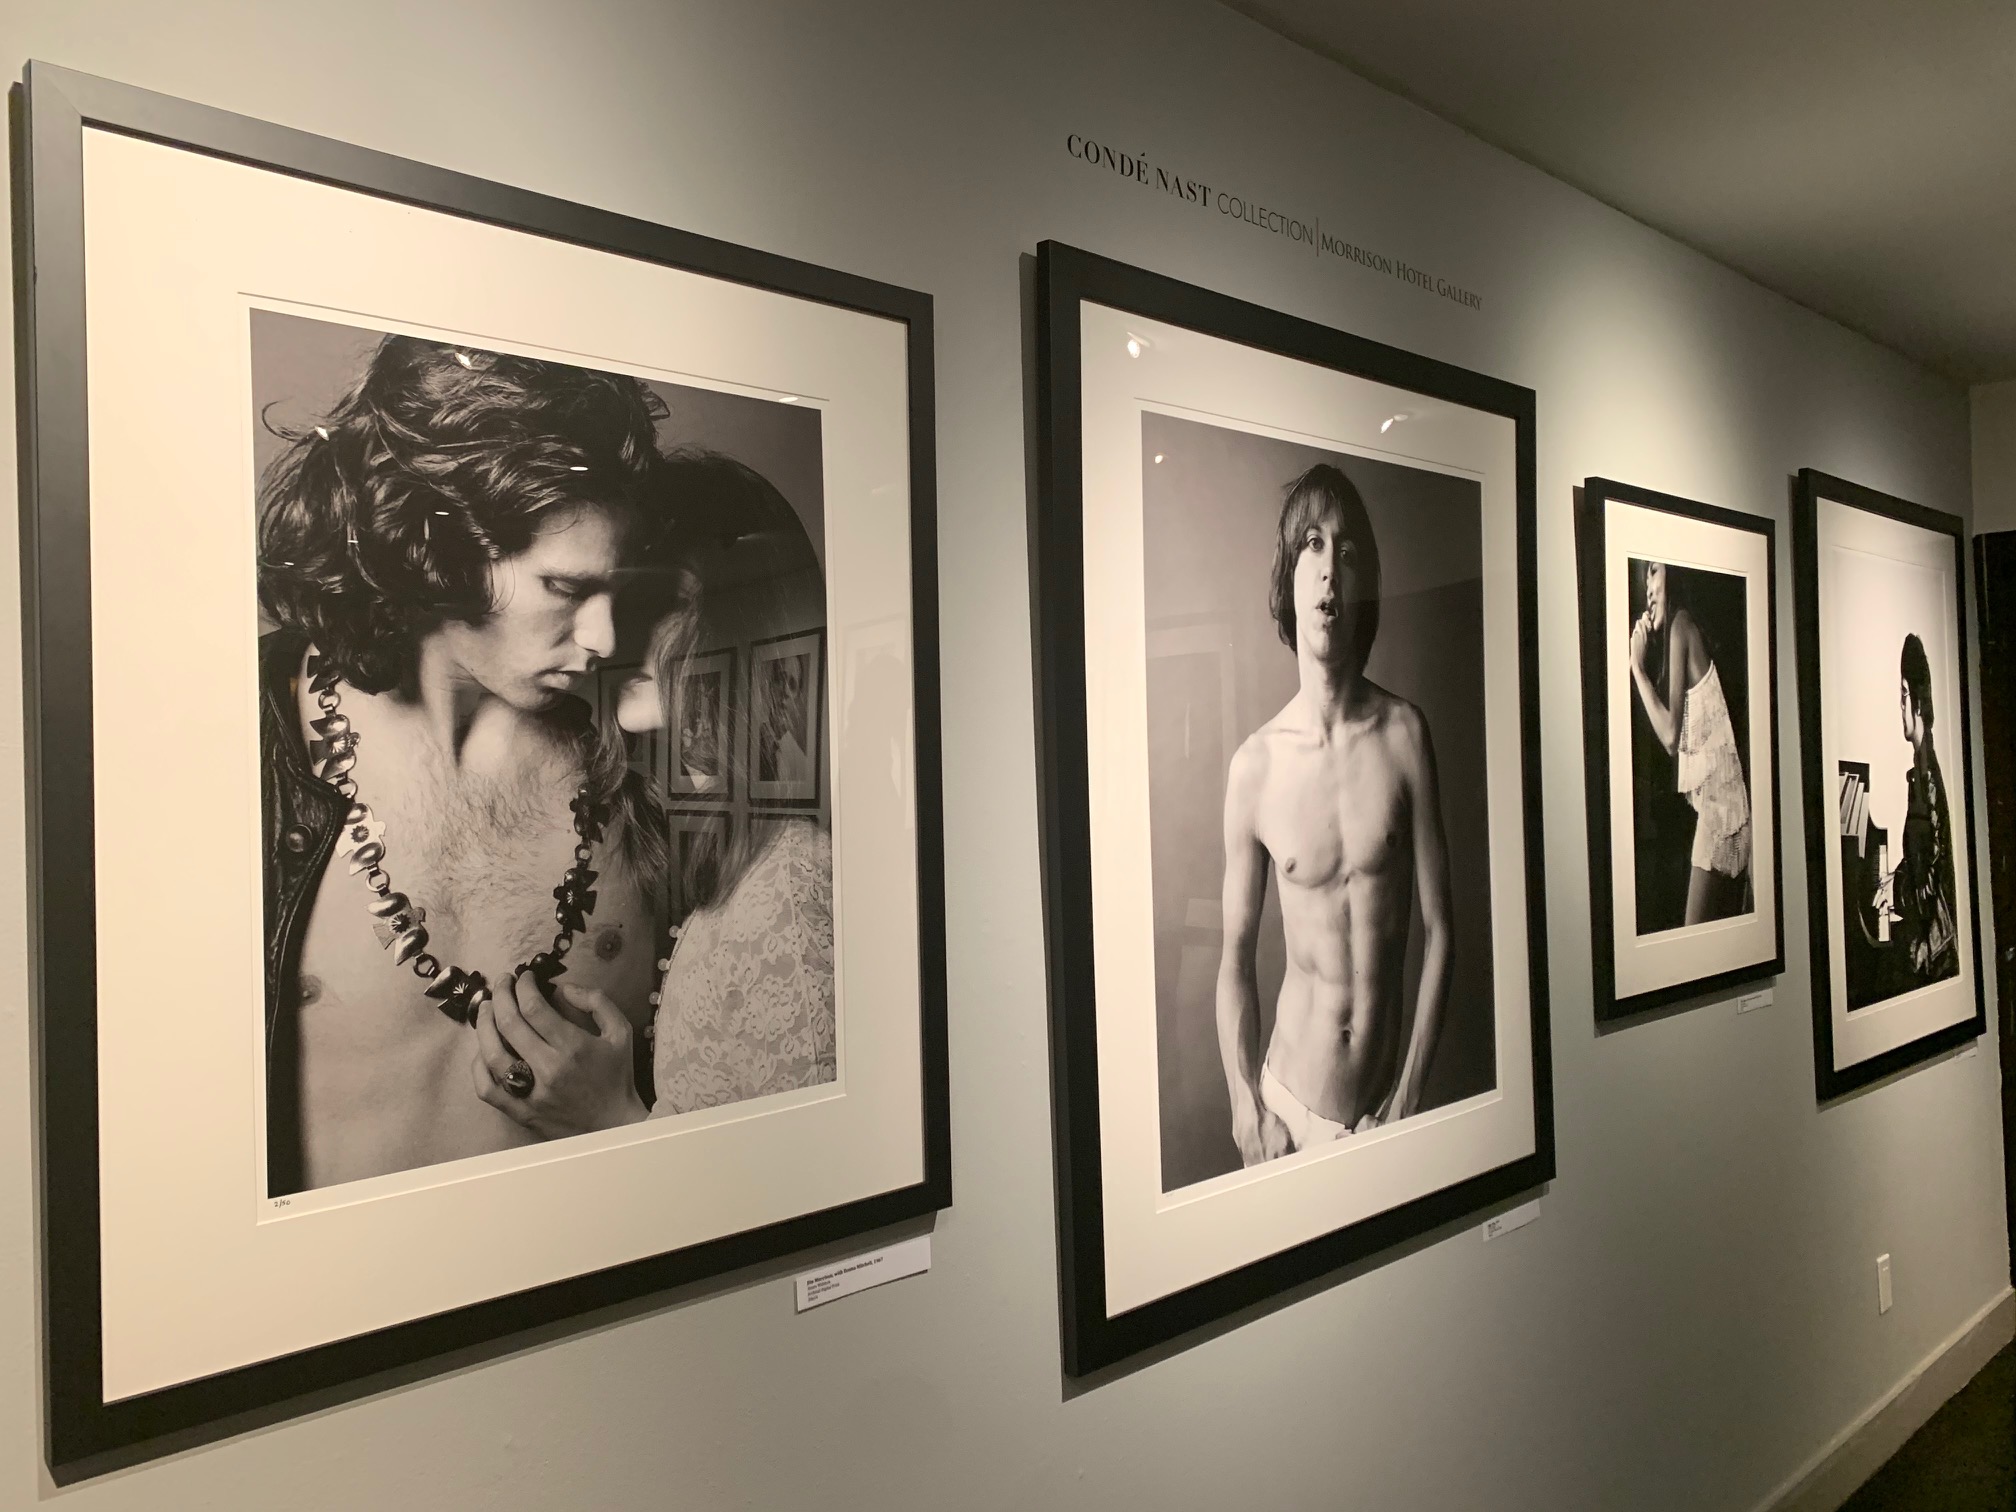 timothy white, morrison hotel gallery, conde nast